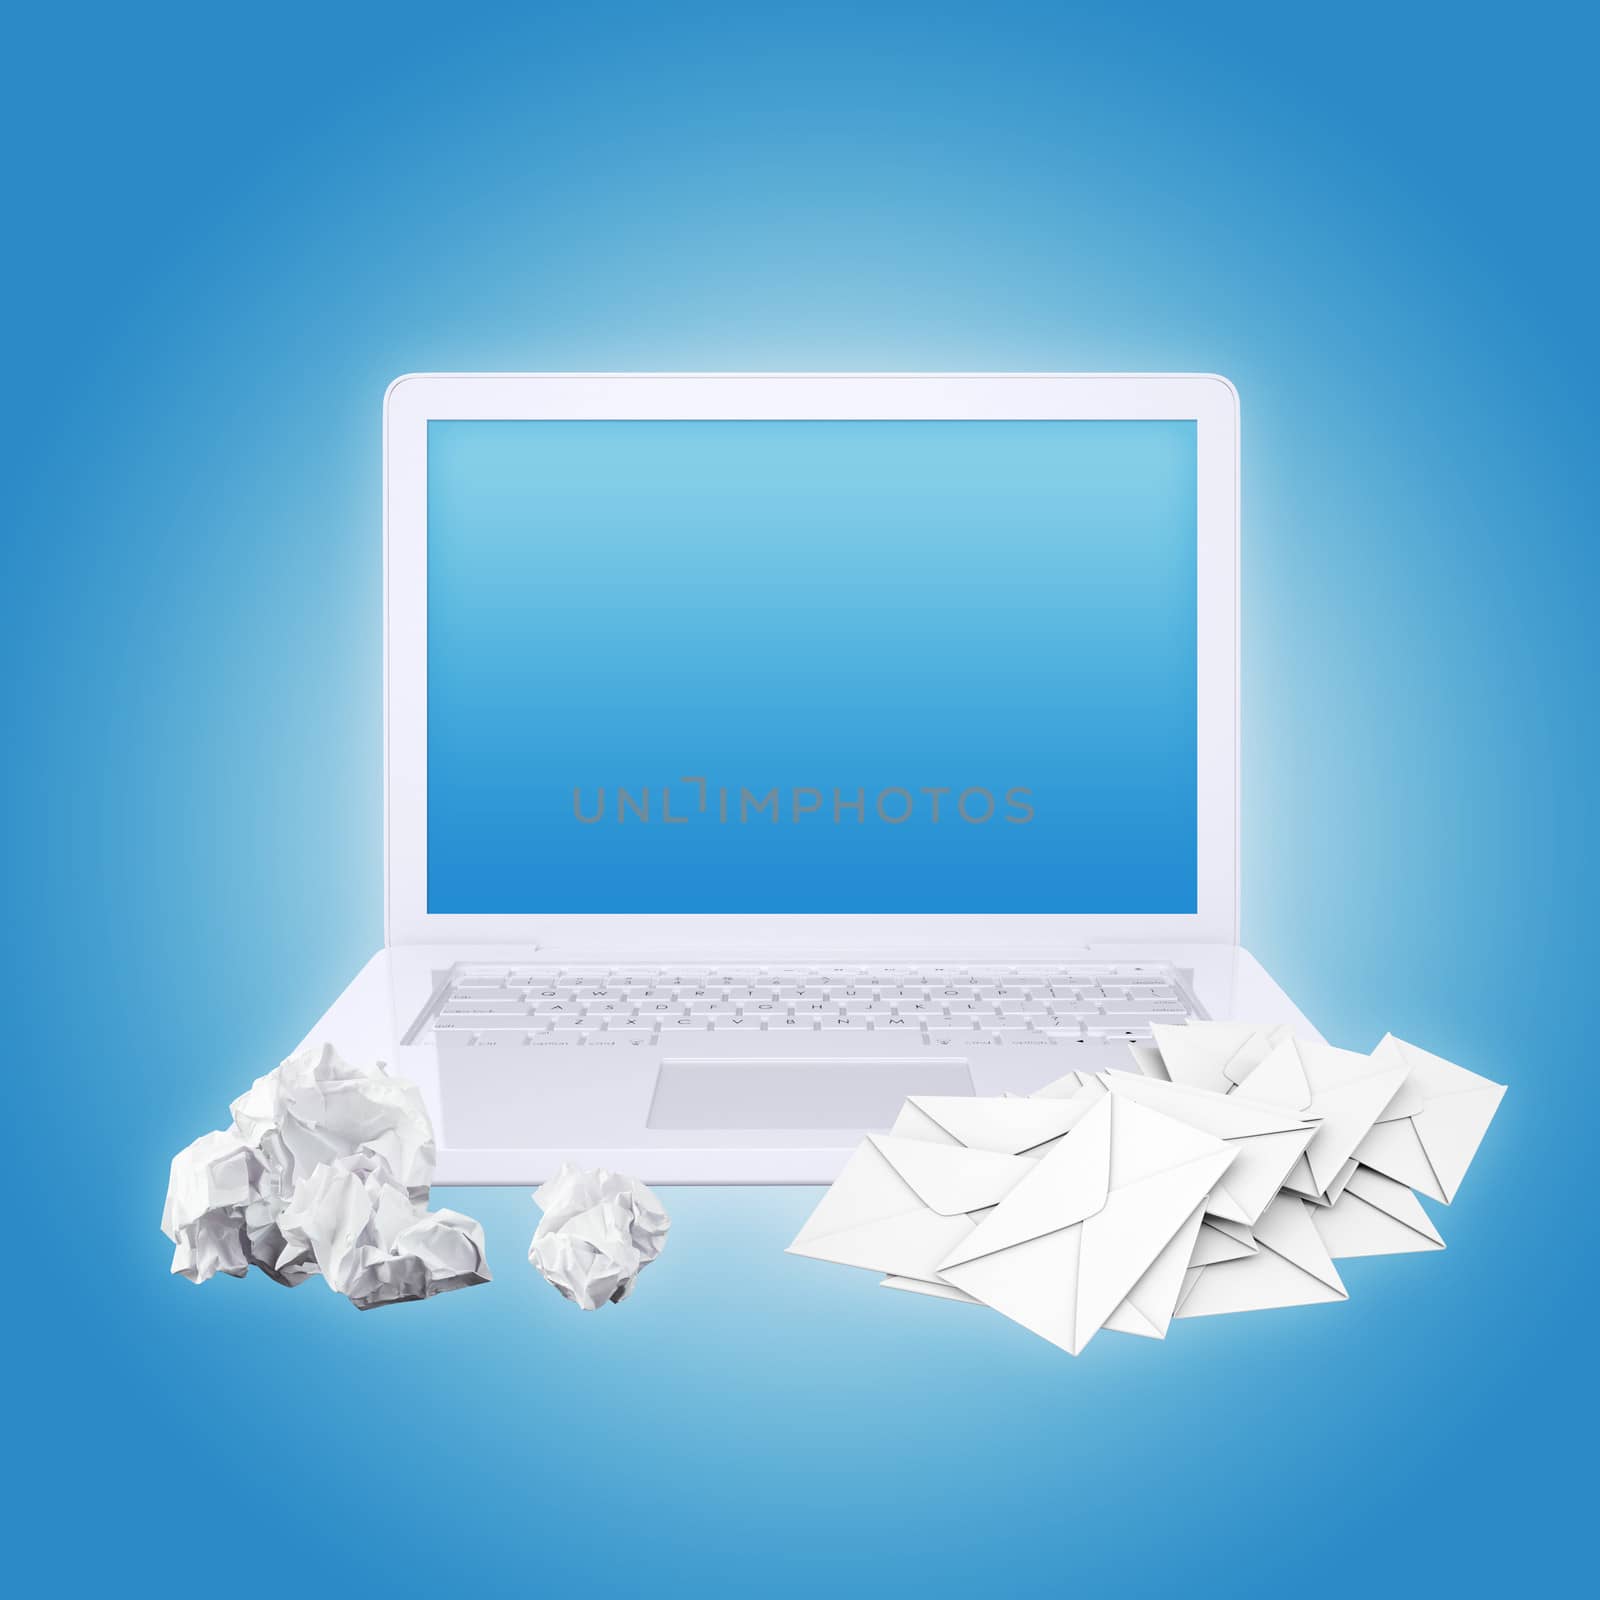 Laptop crumpled paper and envelopes. The concept of e-mailing